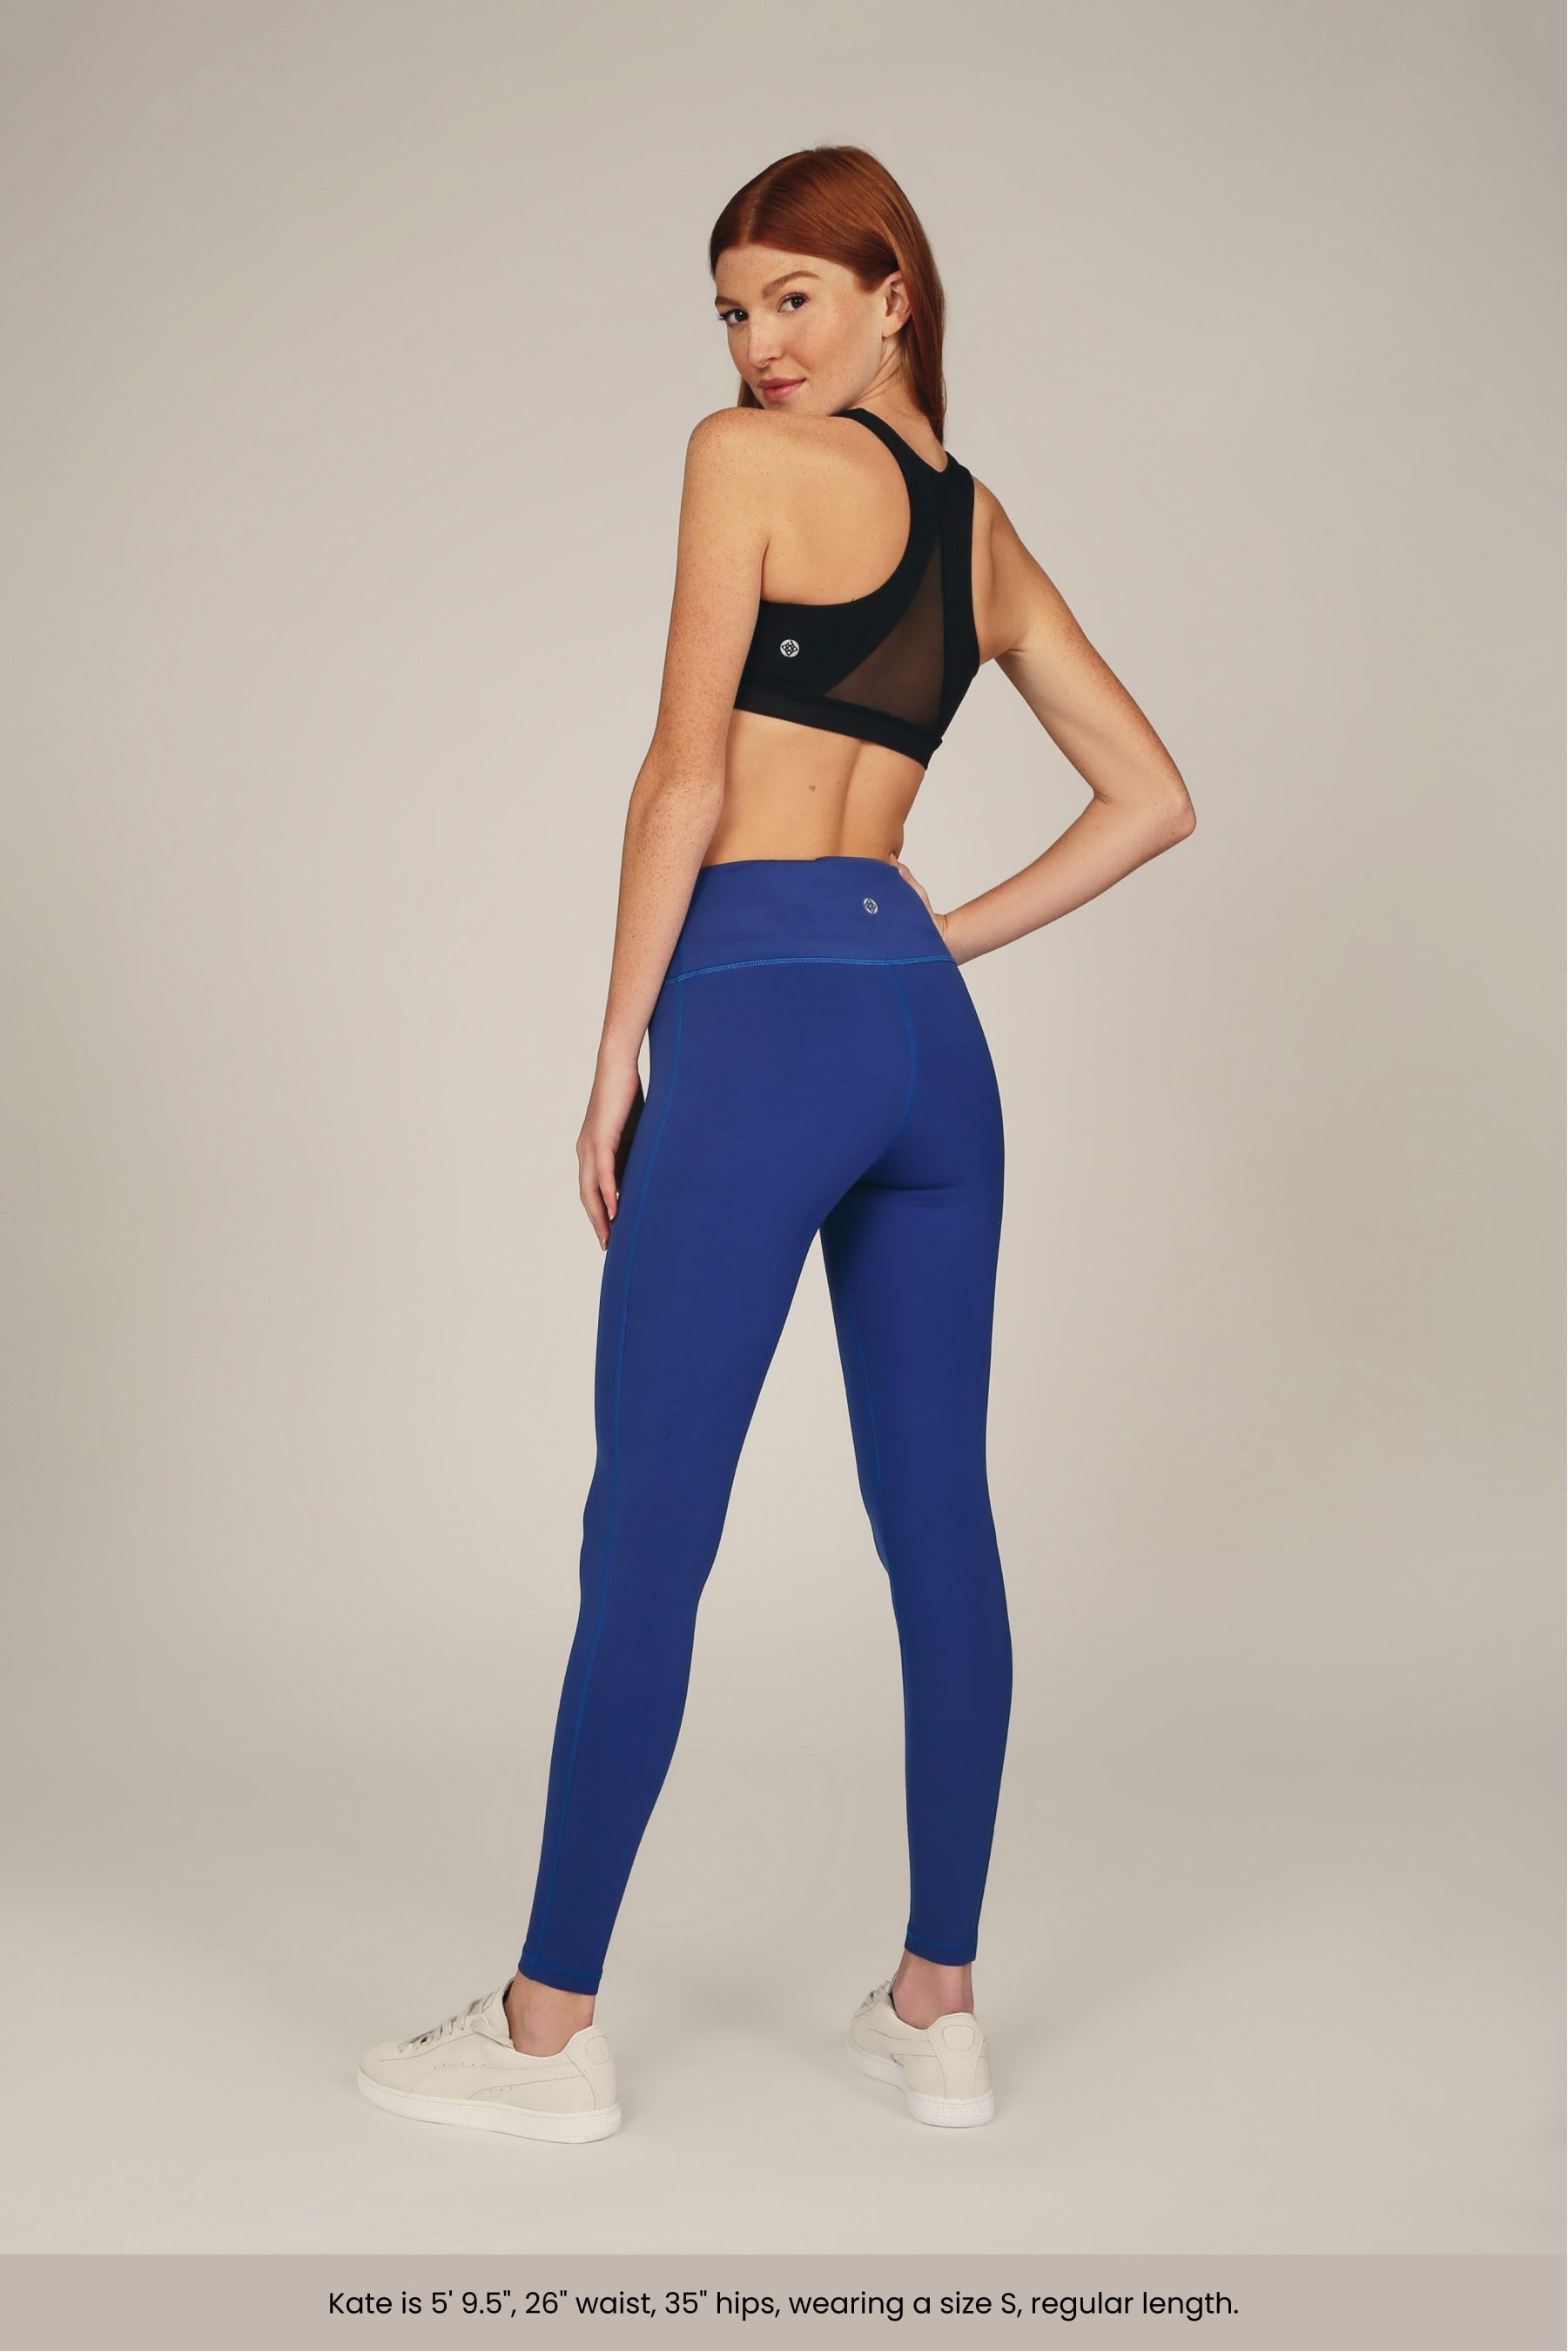 Girlfriend Collective Black Compressive High Rise Legging - $28 - From  Katelyn